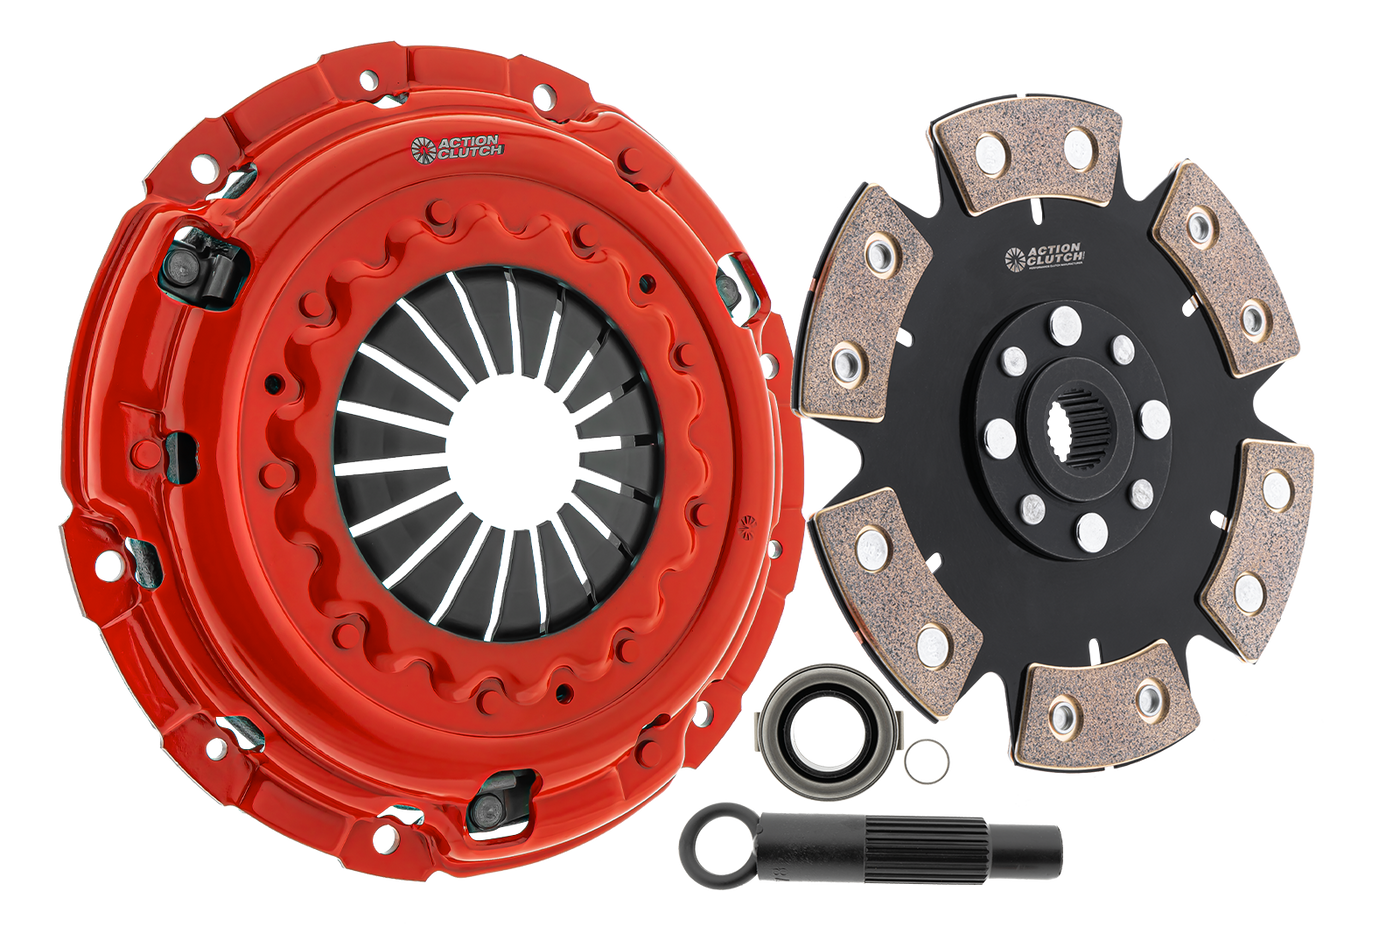 Stage 4 Clutch Kit (1MD) for Mitsubishi Lancer 2004-2007 2.0L SOHC (4G94) Non-Turbo FWD